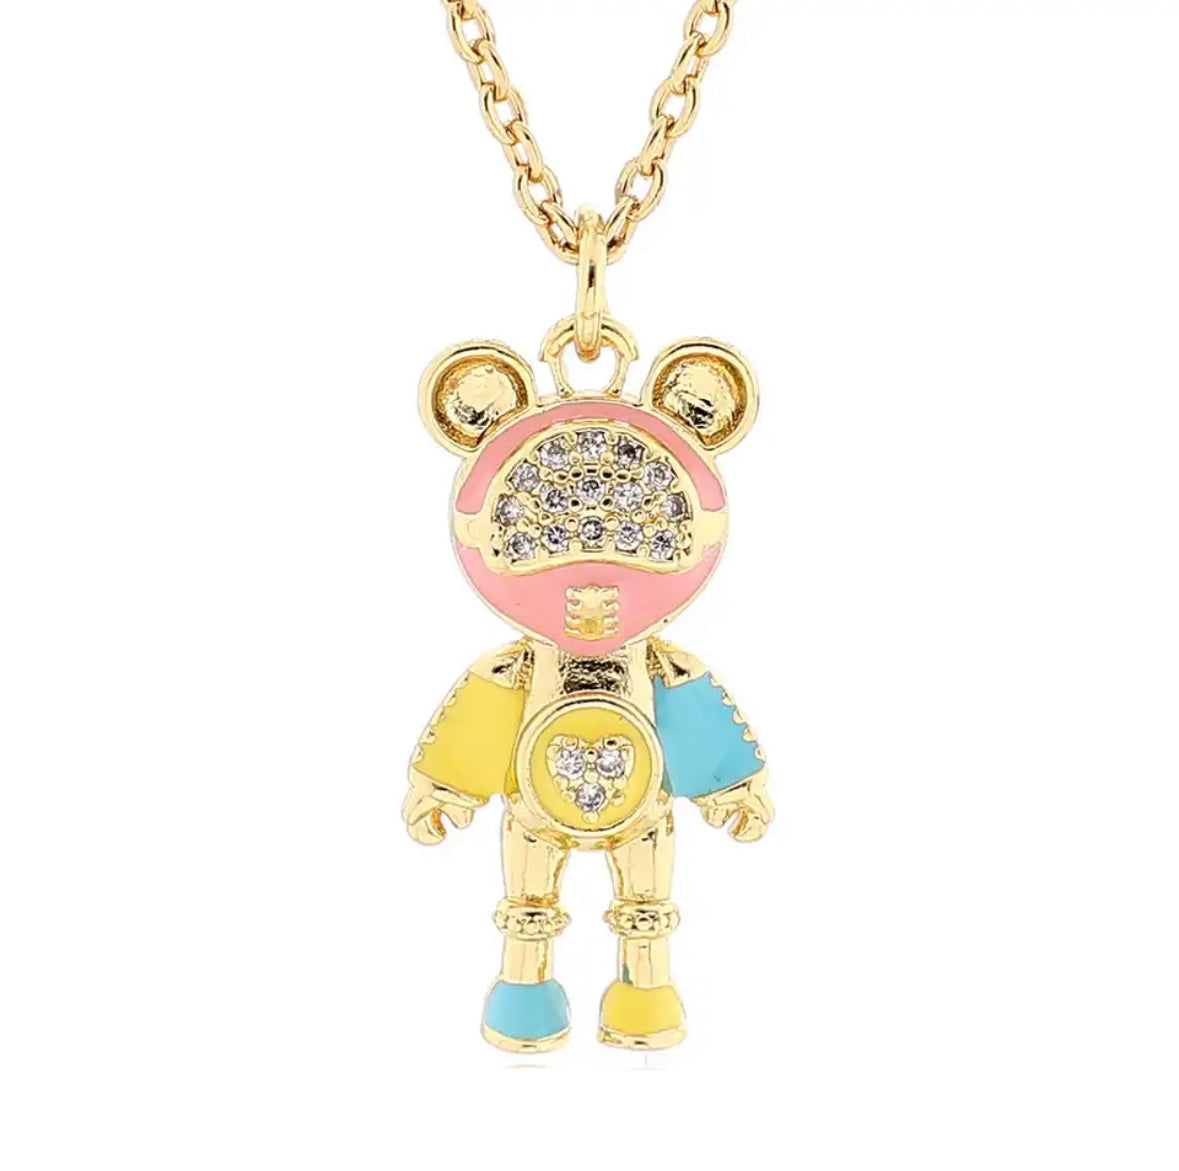 14K YELLOW GOLD PAVE TEDDY BEAR NECKLACE | Patty Q's Jewelry Inc